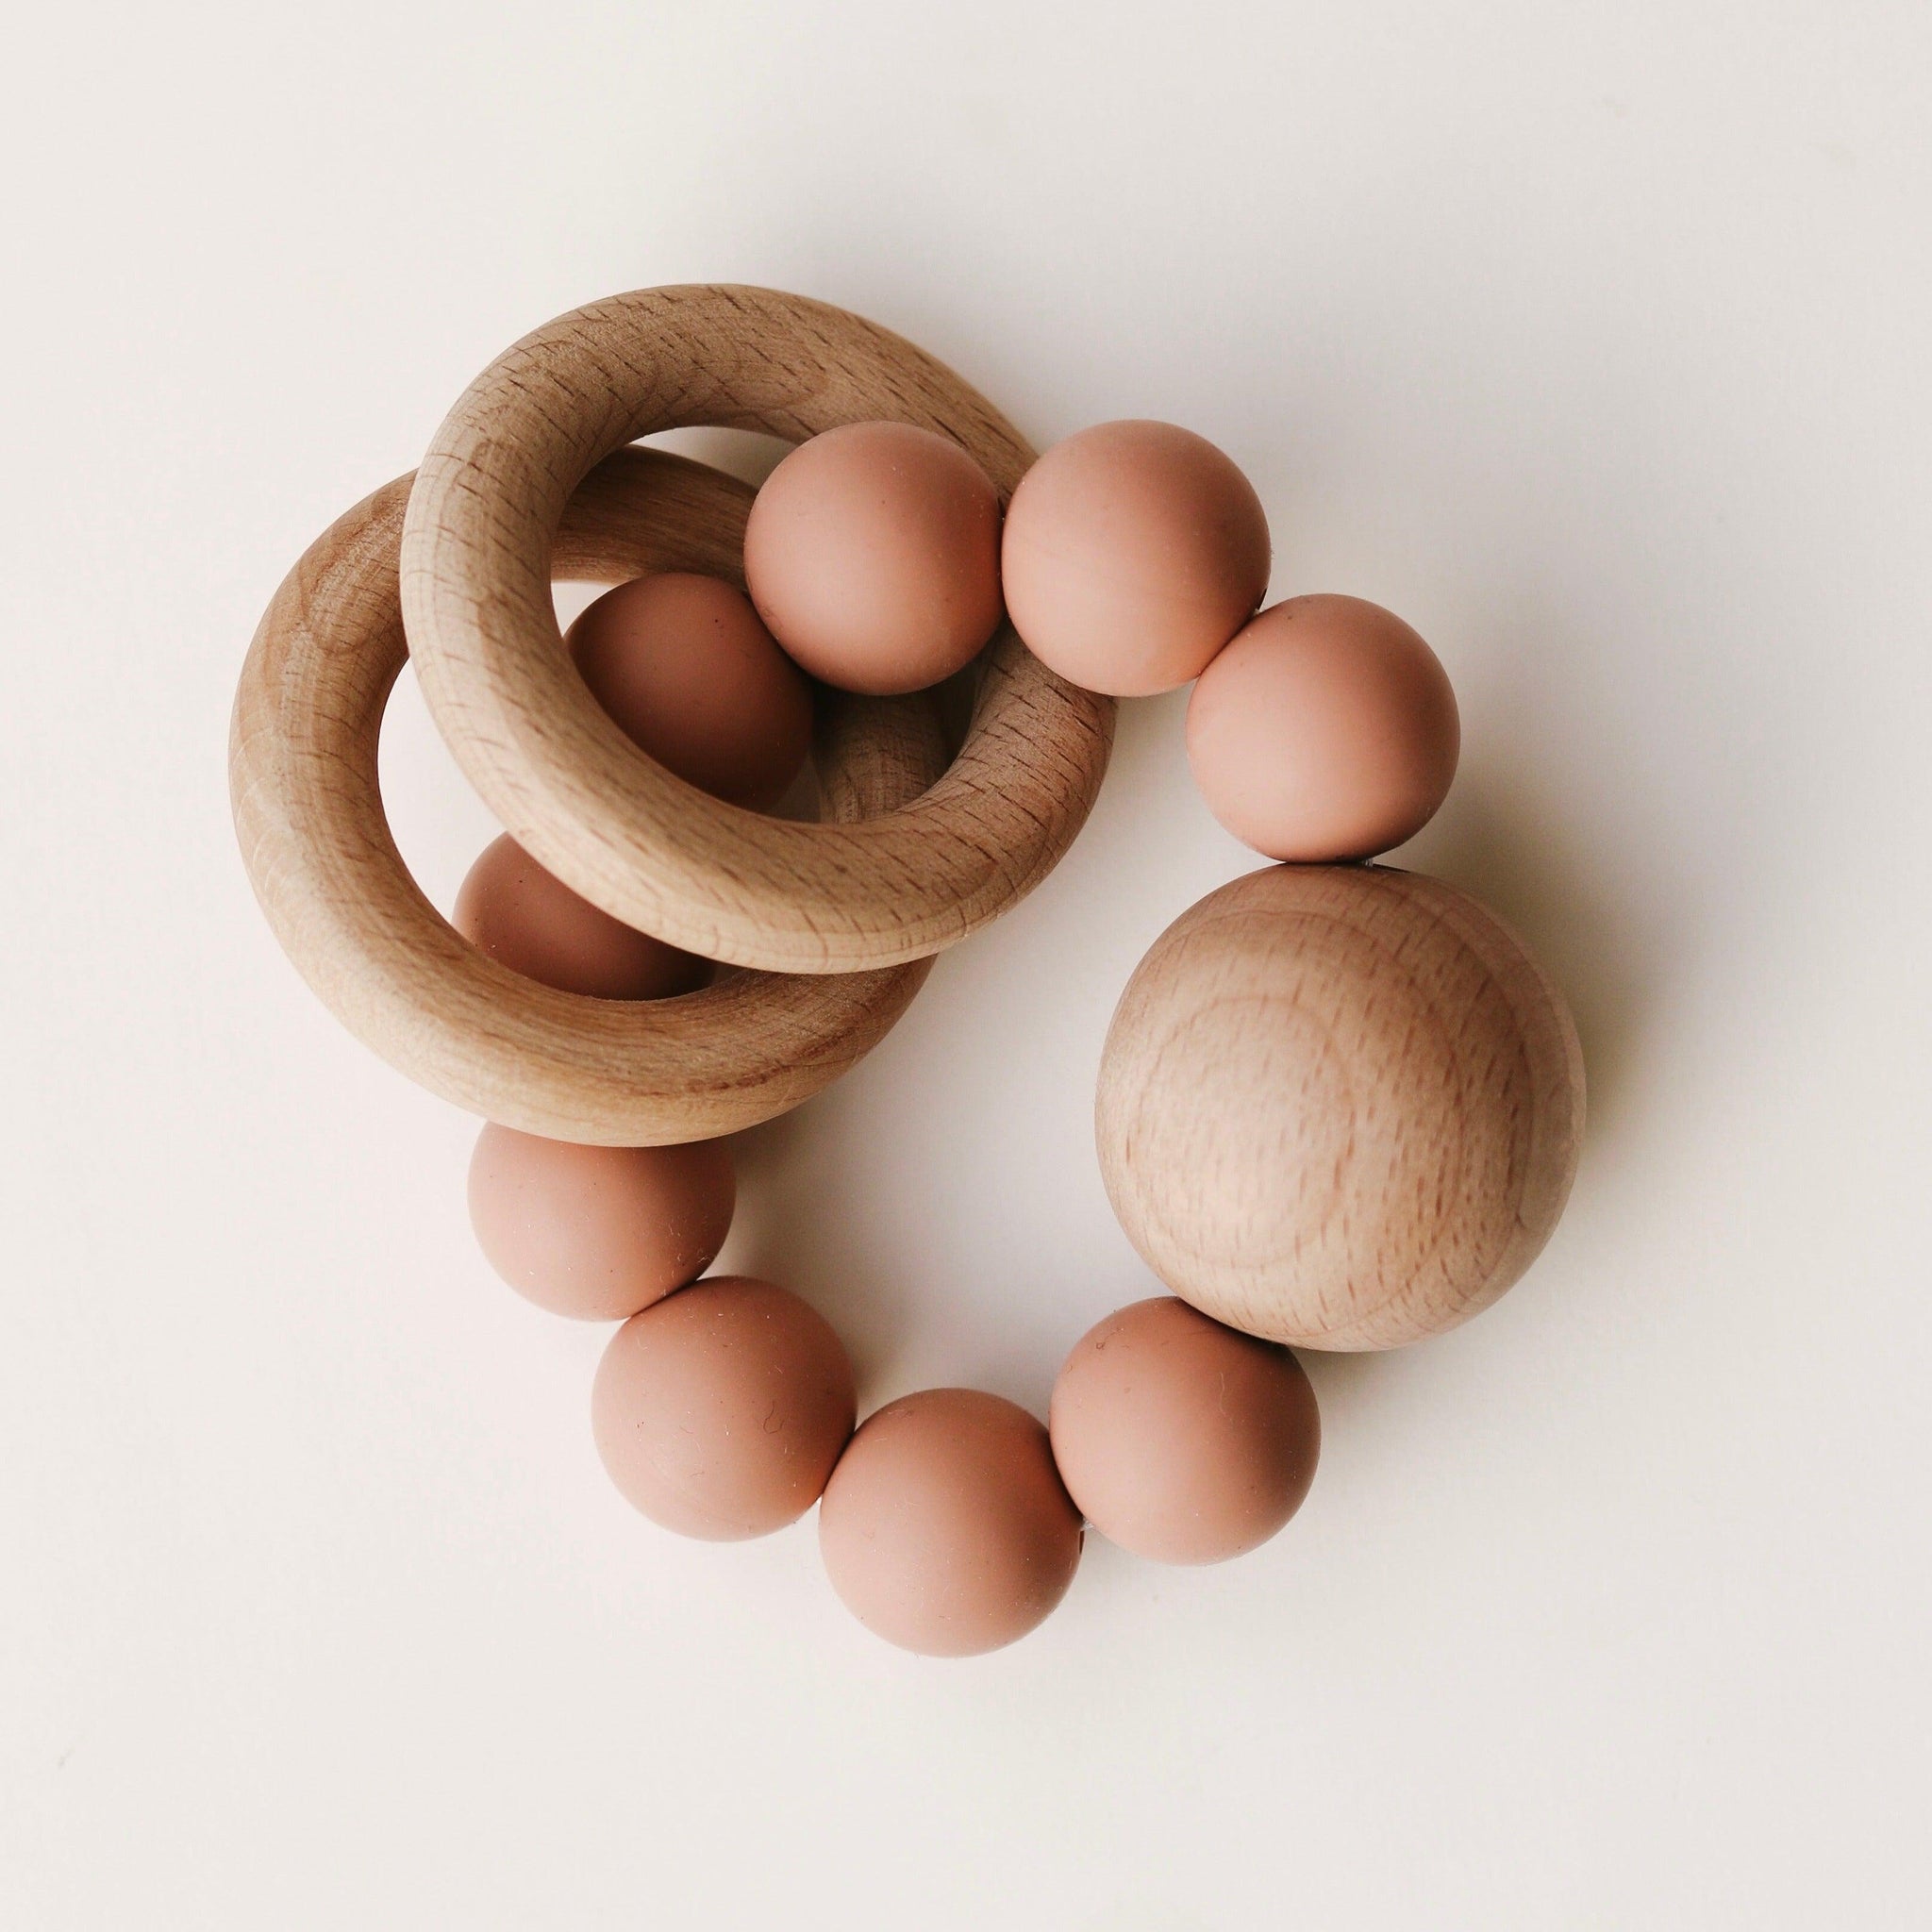 Two untreated wood rings move freely around the circle of 20mm BPA free silicone beads creating a soft rattle when baby shakes. All finished off with massive 35mm untreated beech wood bead.